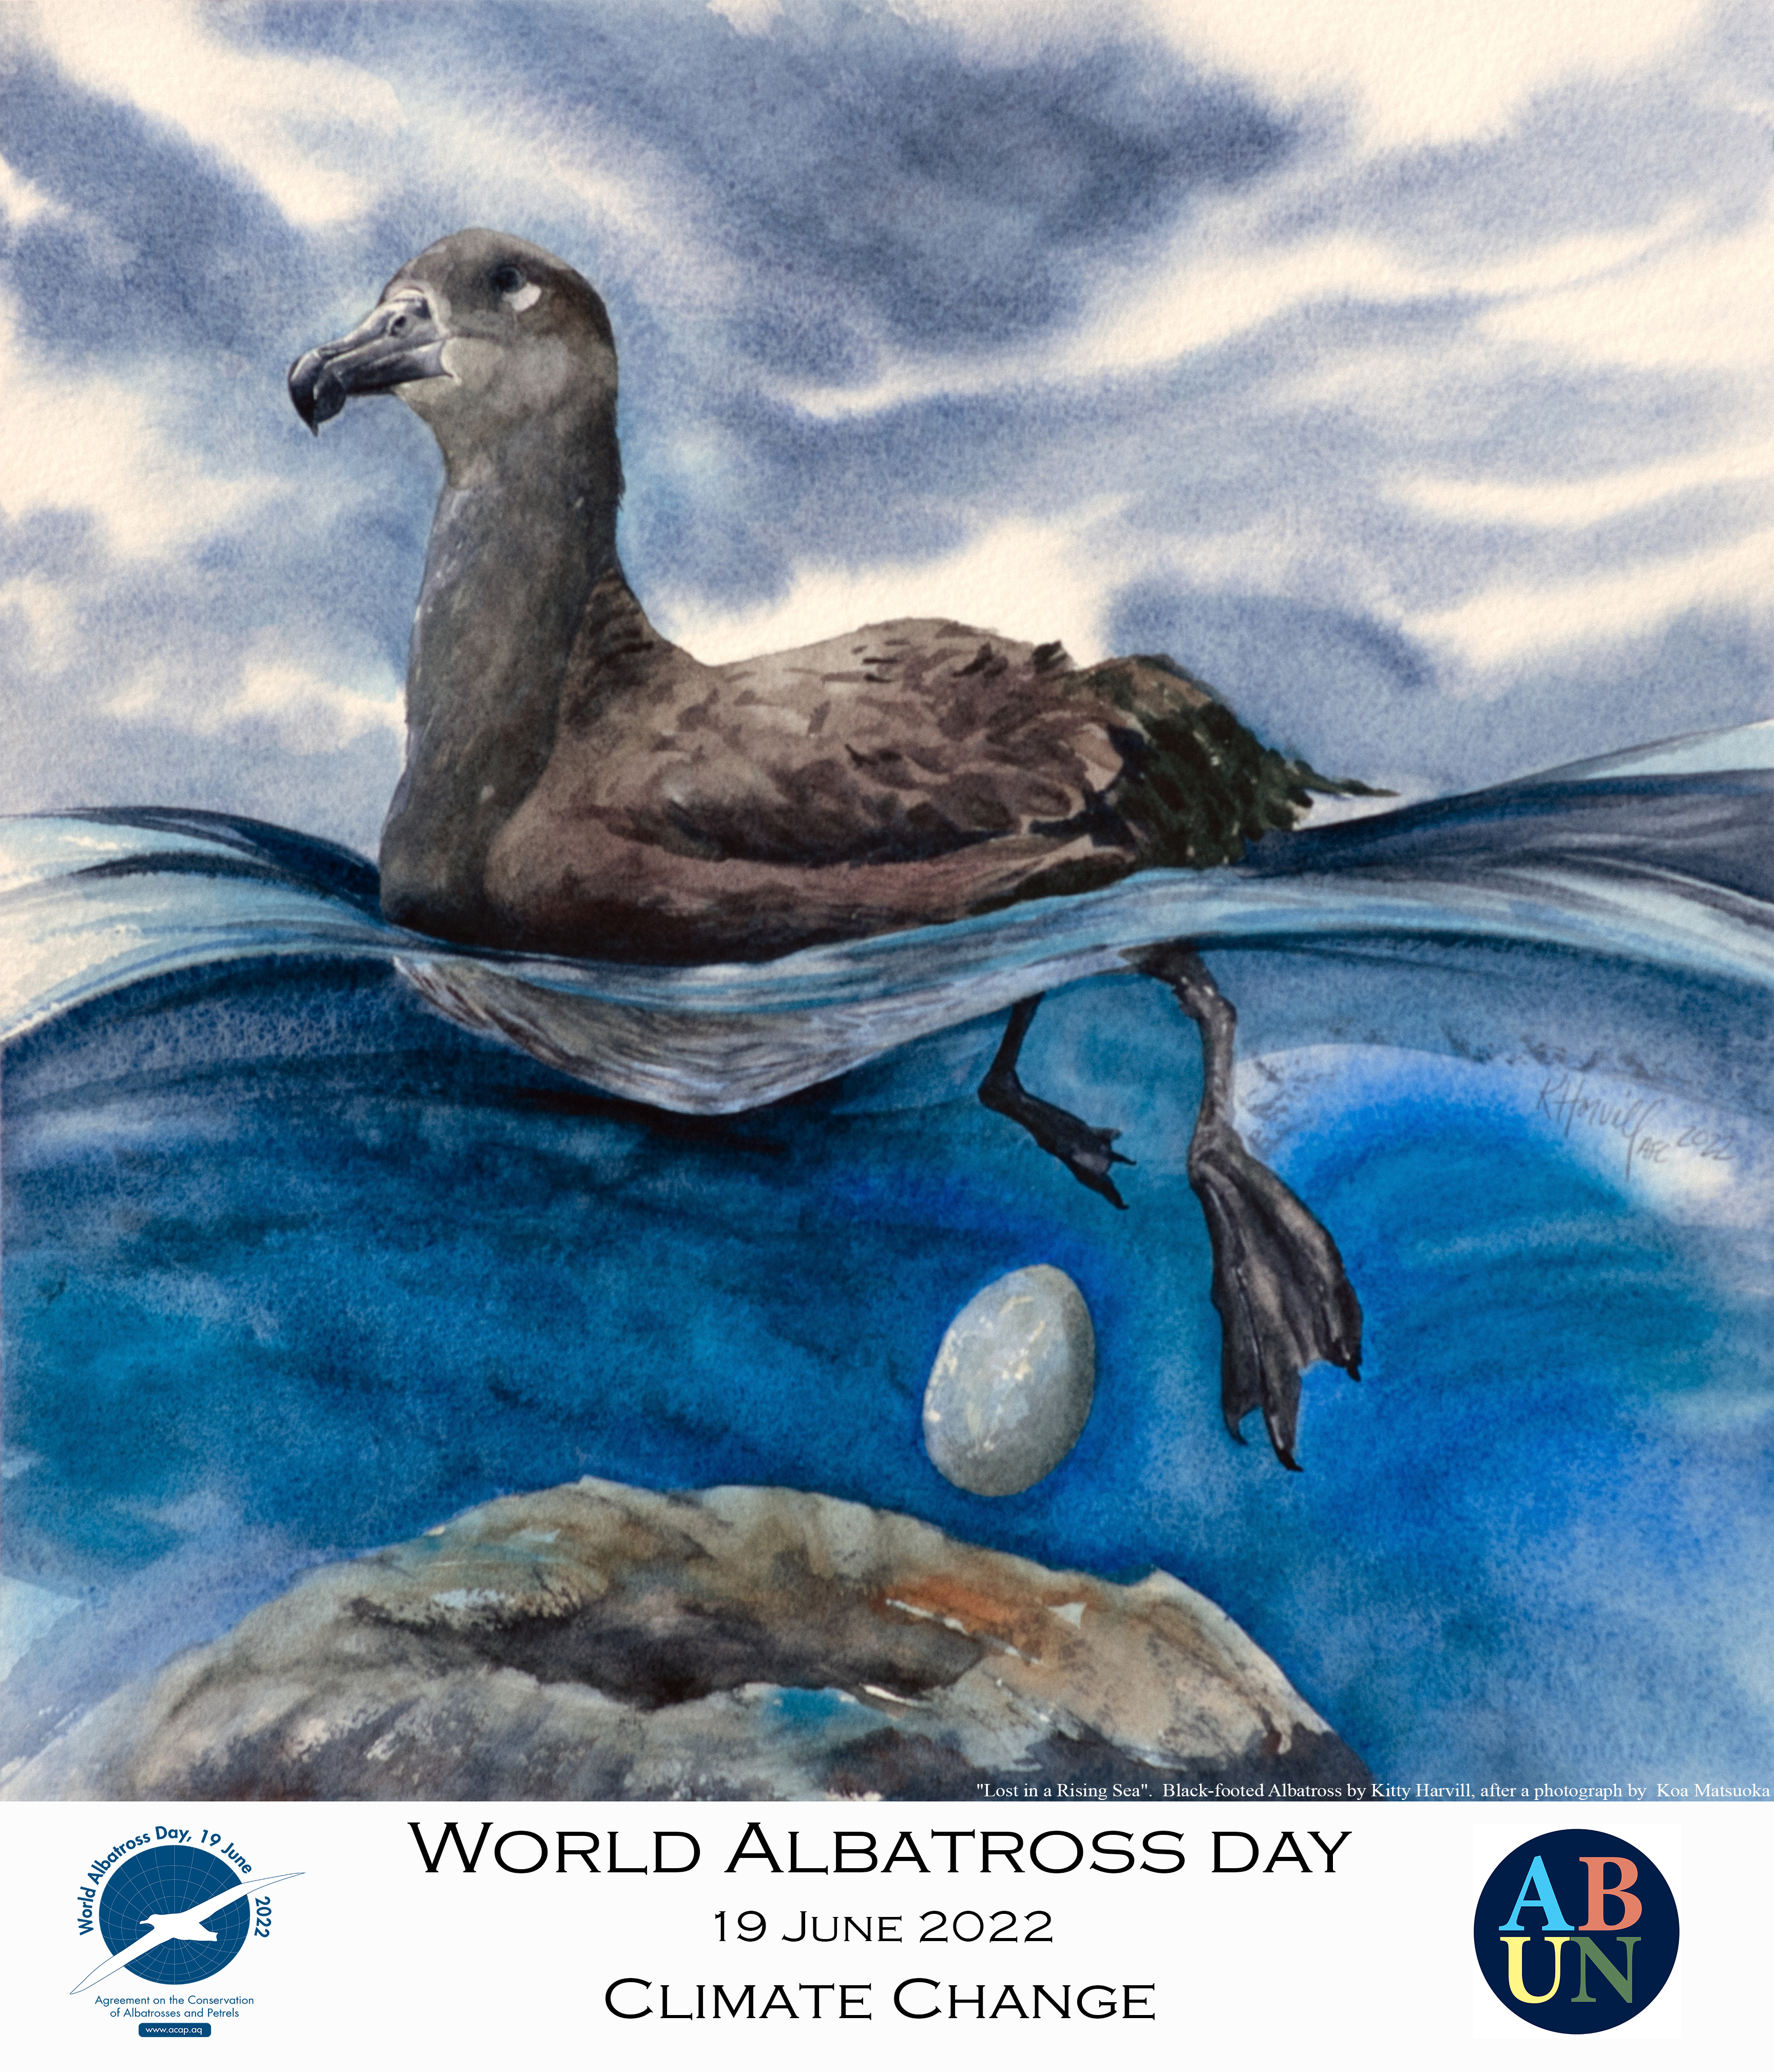 Art Poster Lost in a Rising Sea Black footed Albatross by Kitty Harvill after a photograph by Koa Matsuoka